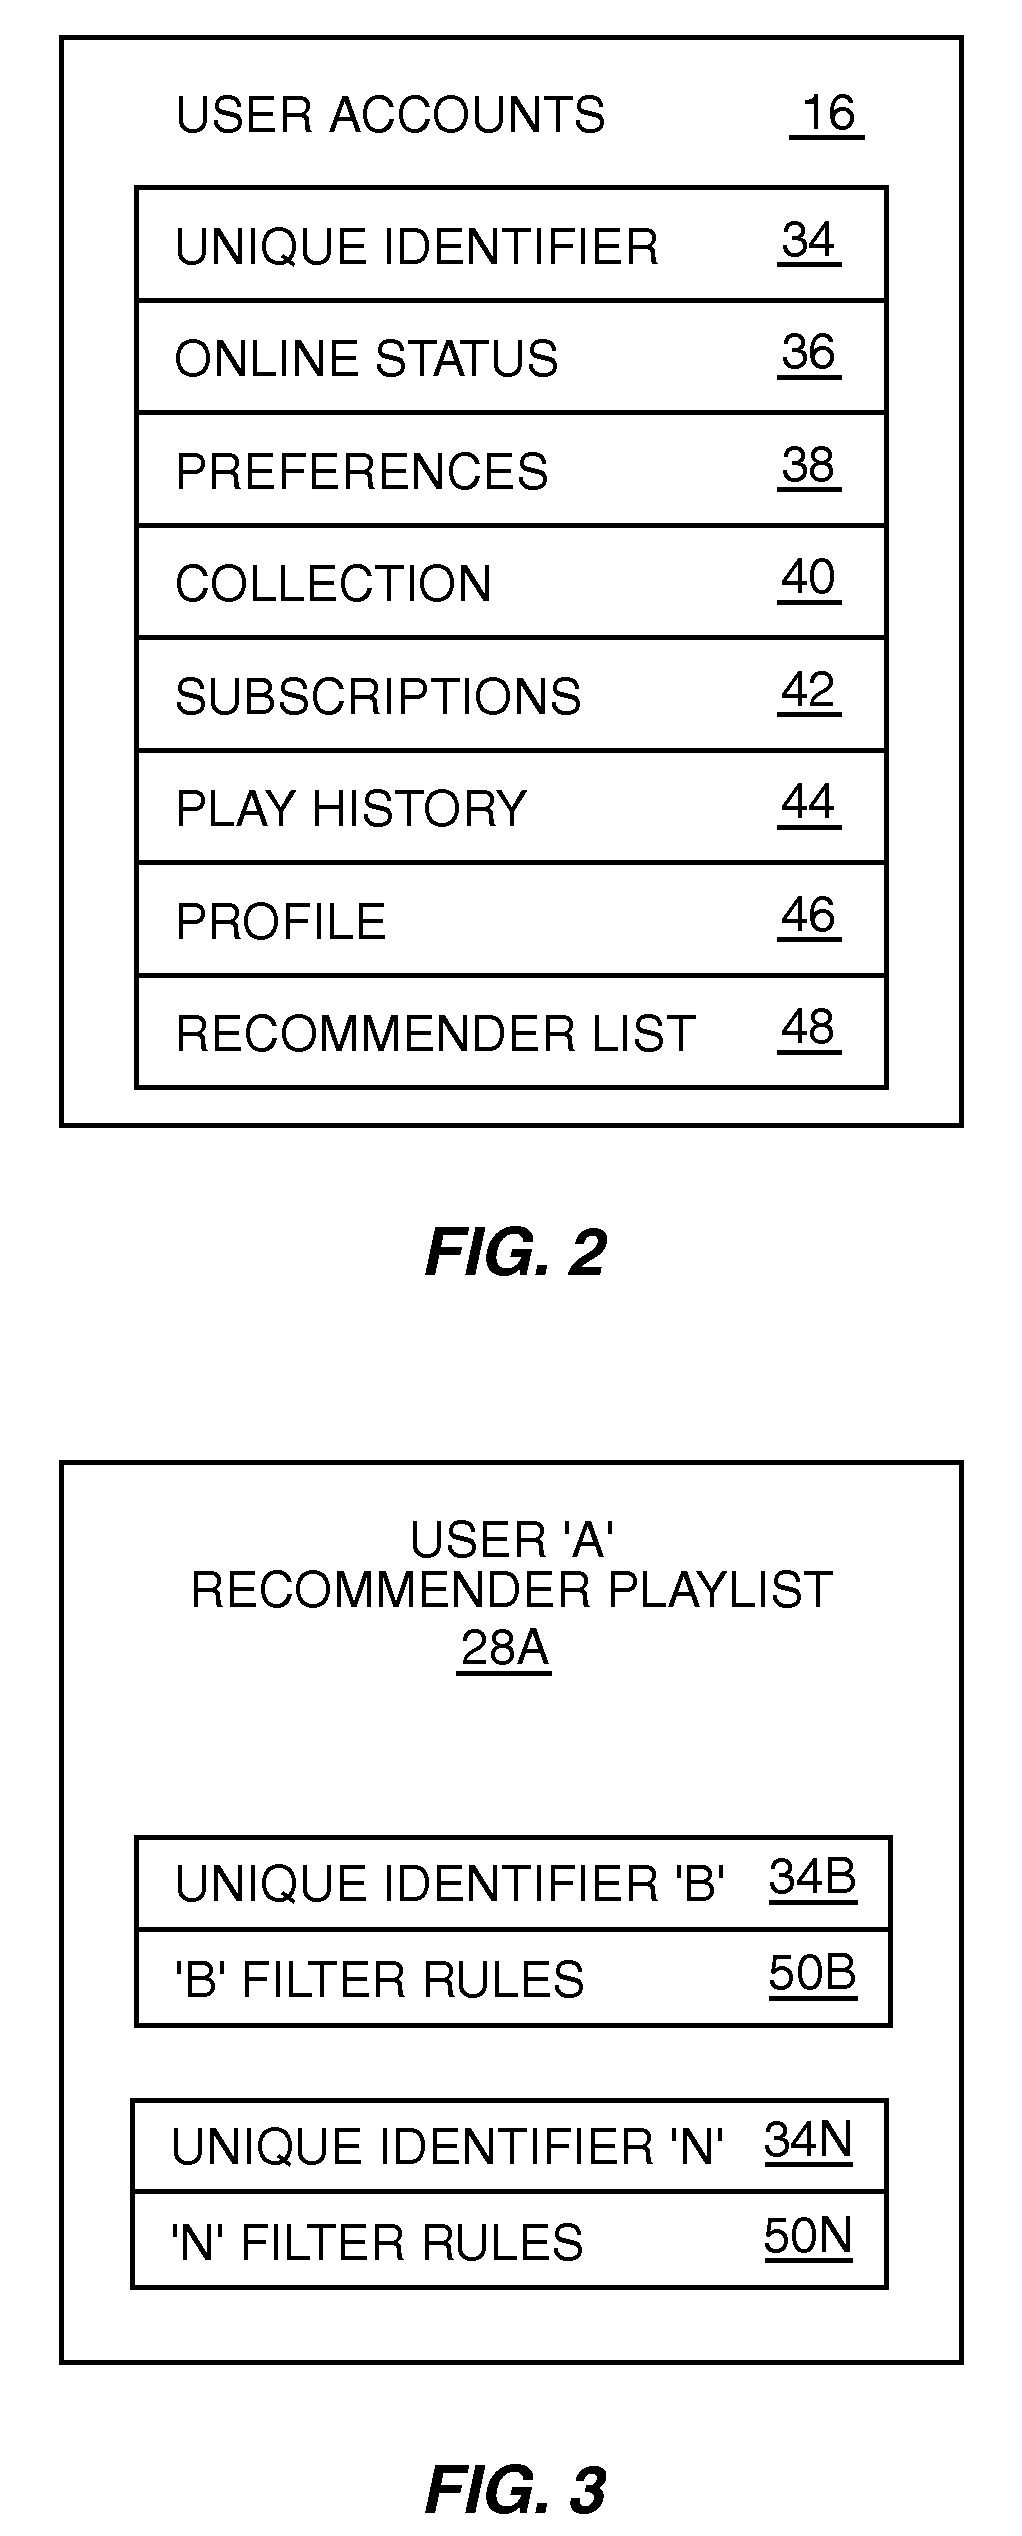 System and method for selectively identifying media items for play based on a recommender playlist